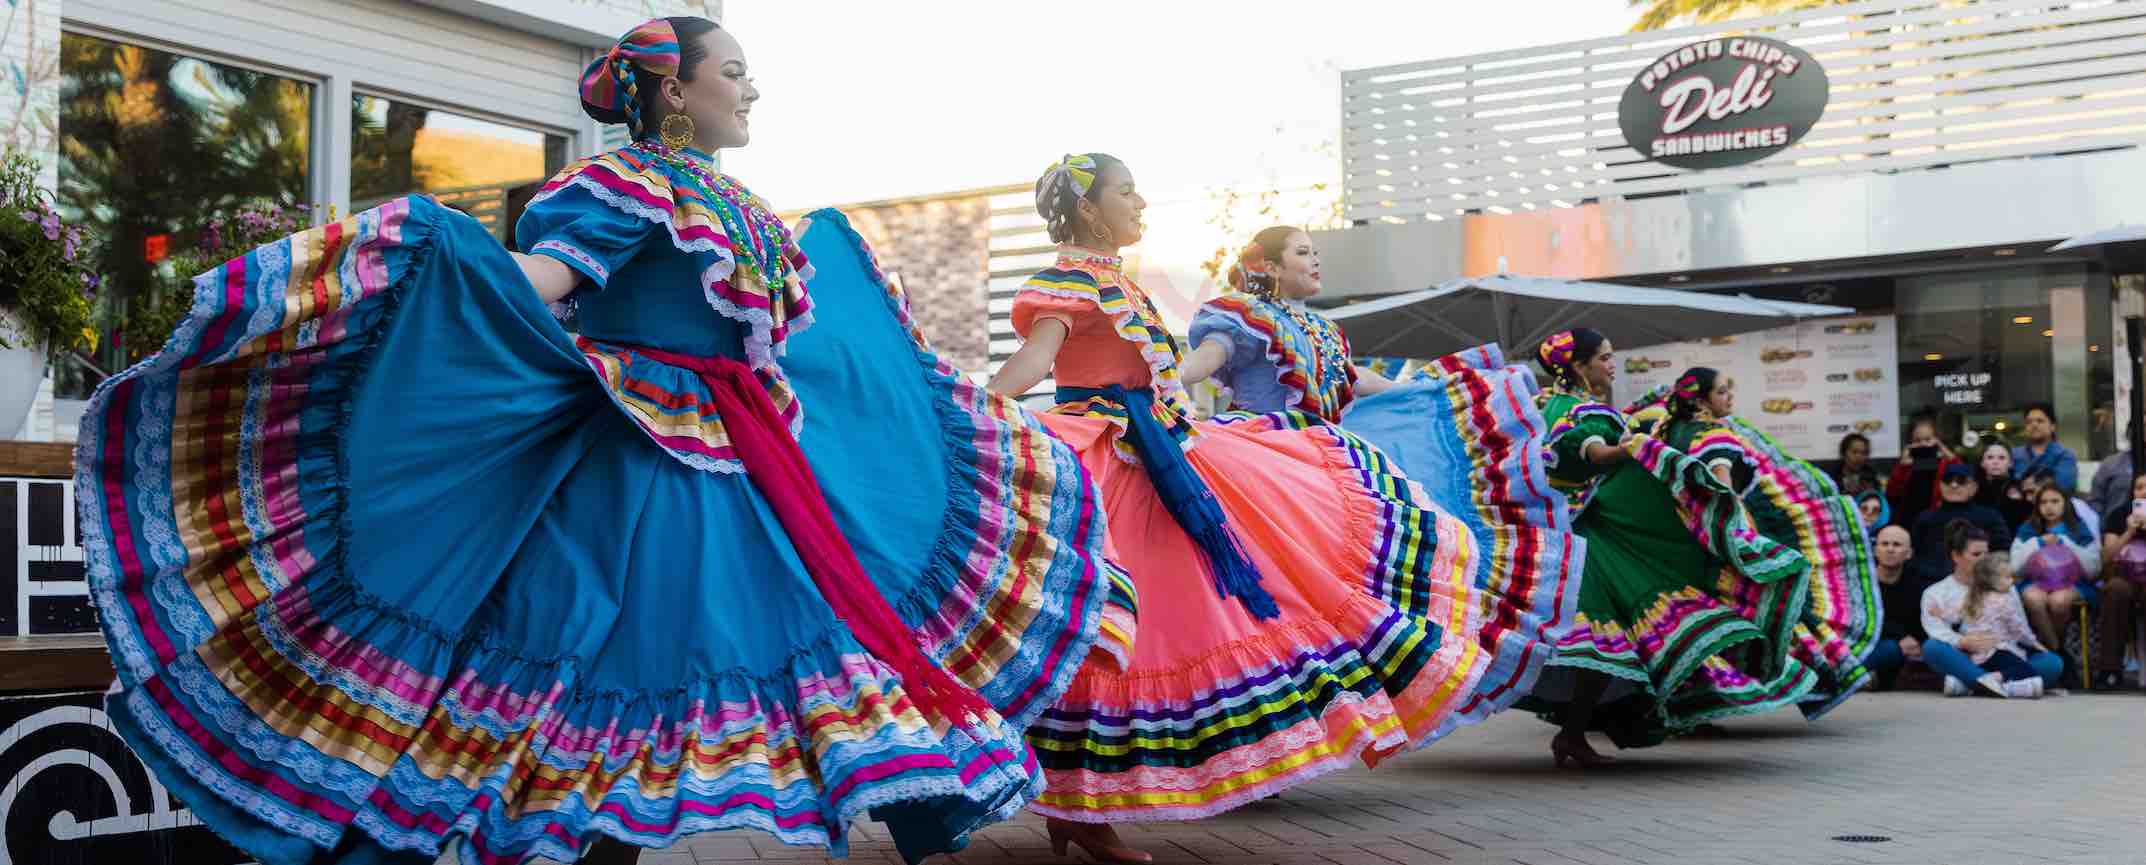 2ND & PCH Celebrates Cinco de Mayo and Mother’s Day Events in May